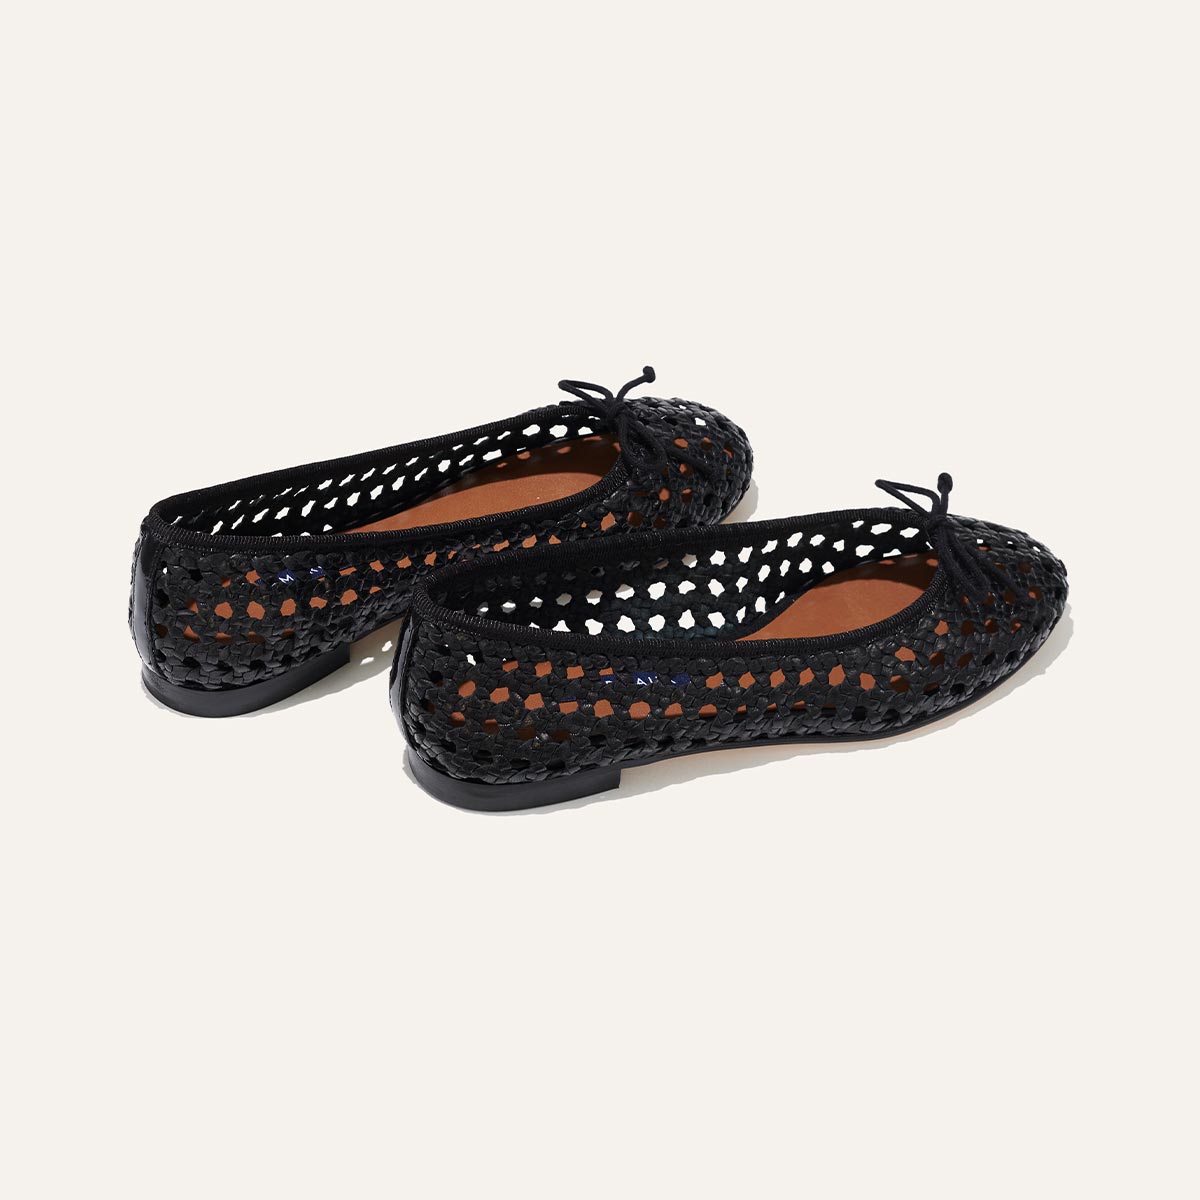 The Woven Demi - Black Leather